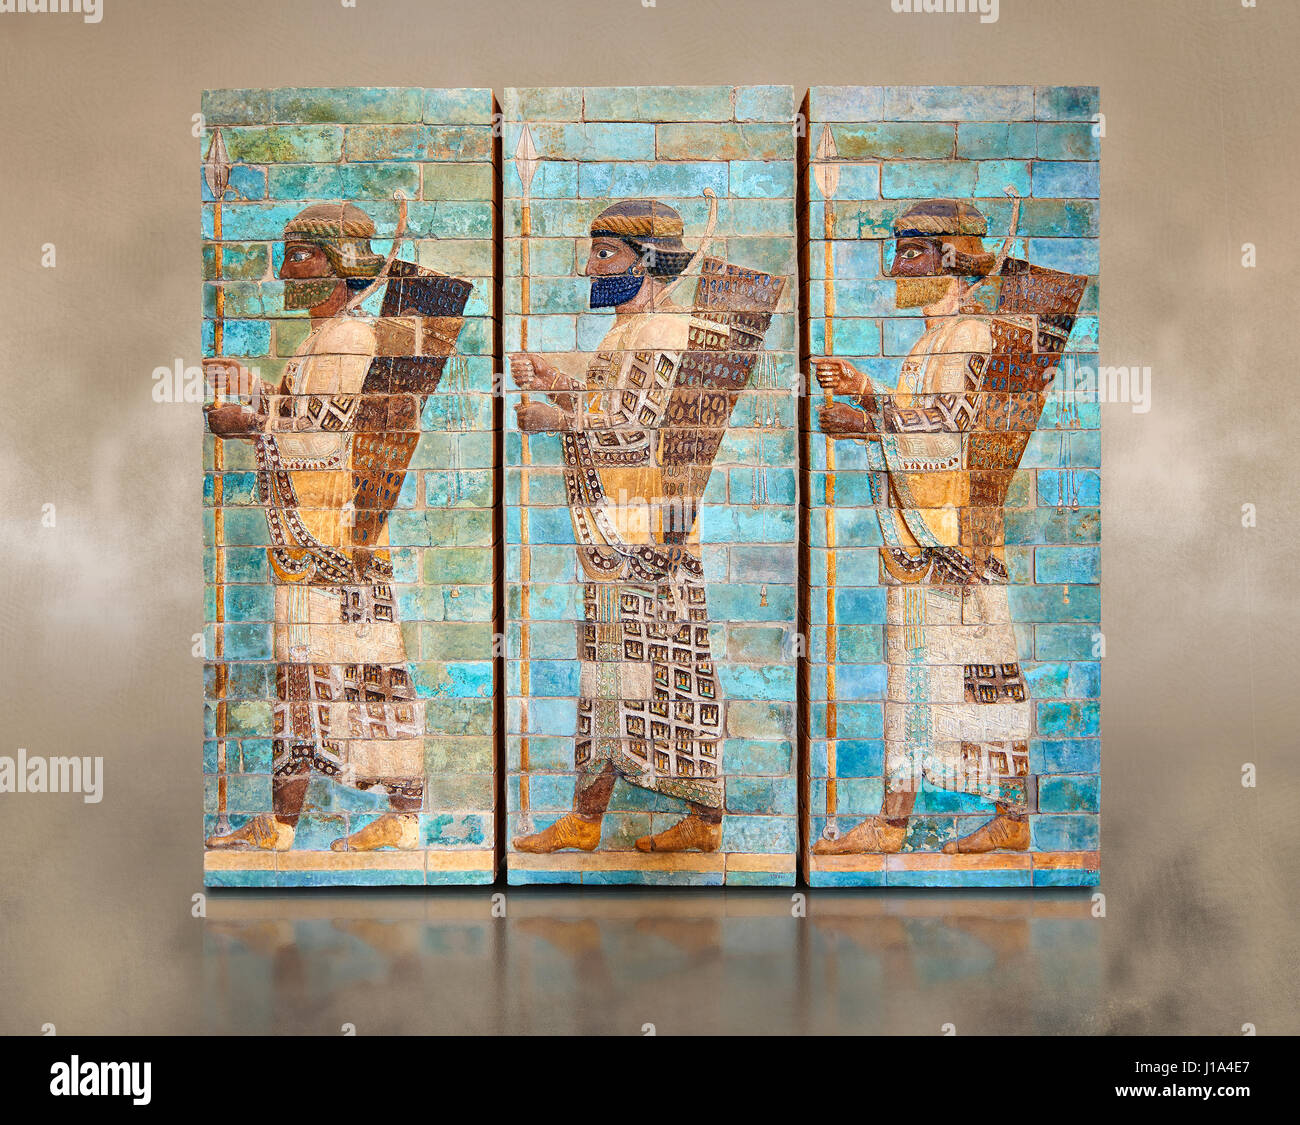 Coloured glazed terracotta brick panels depicting Achaemenid Persian royal bodyguards or archers, reign of Darius 1st ,  Inv Ab3312-21, The Louvre Stock Photo